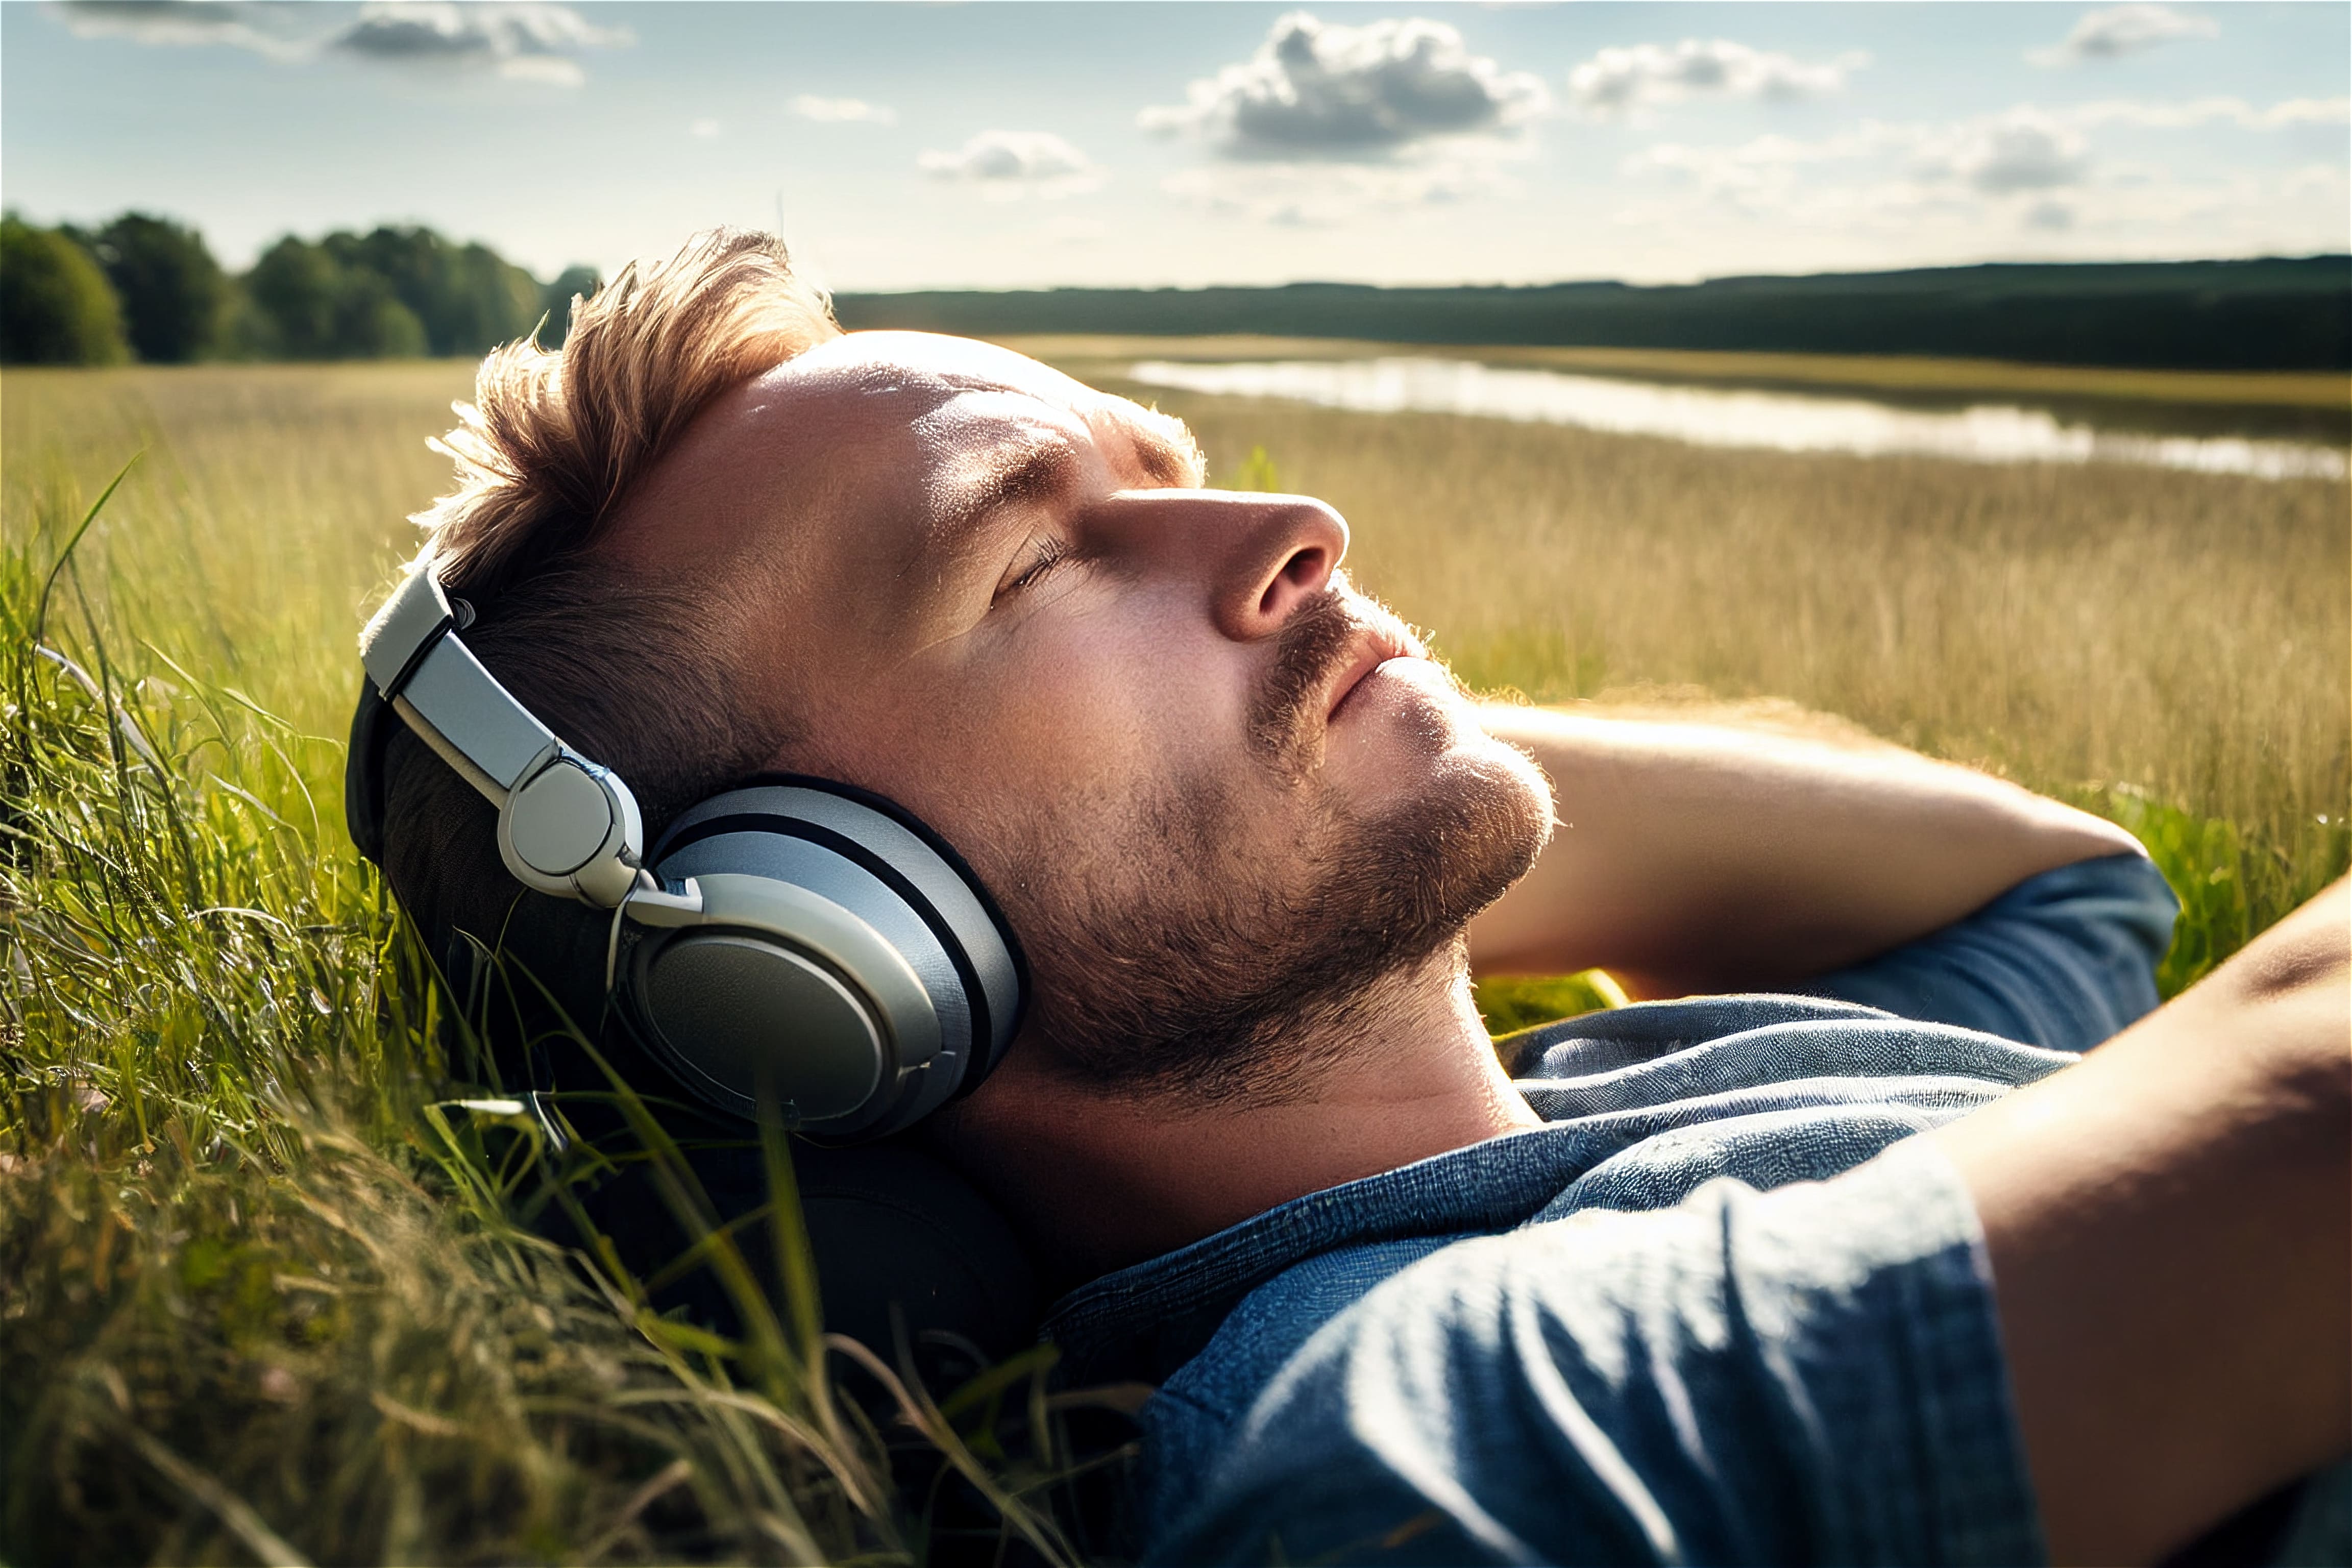 A man lay in a field of grass wearing his headphones and closing his eyes while listening to music. The sky is blue and white fluffy clouds float past